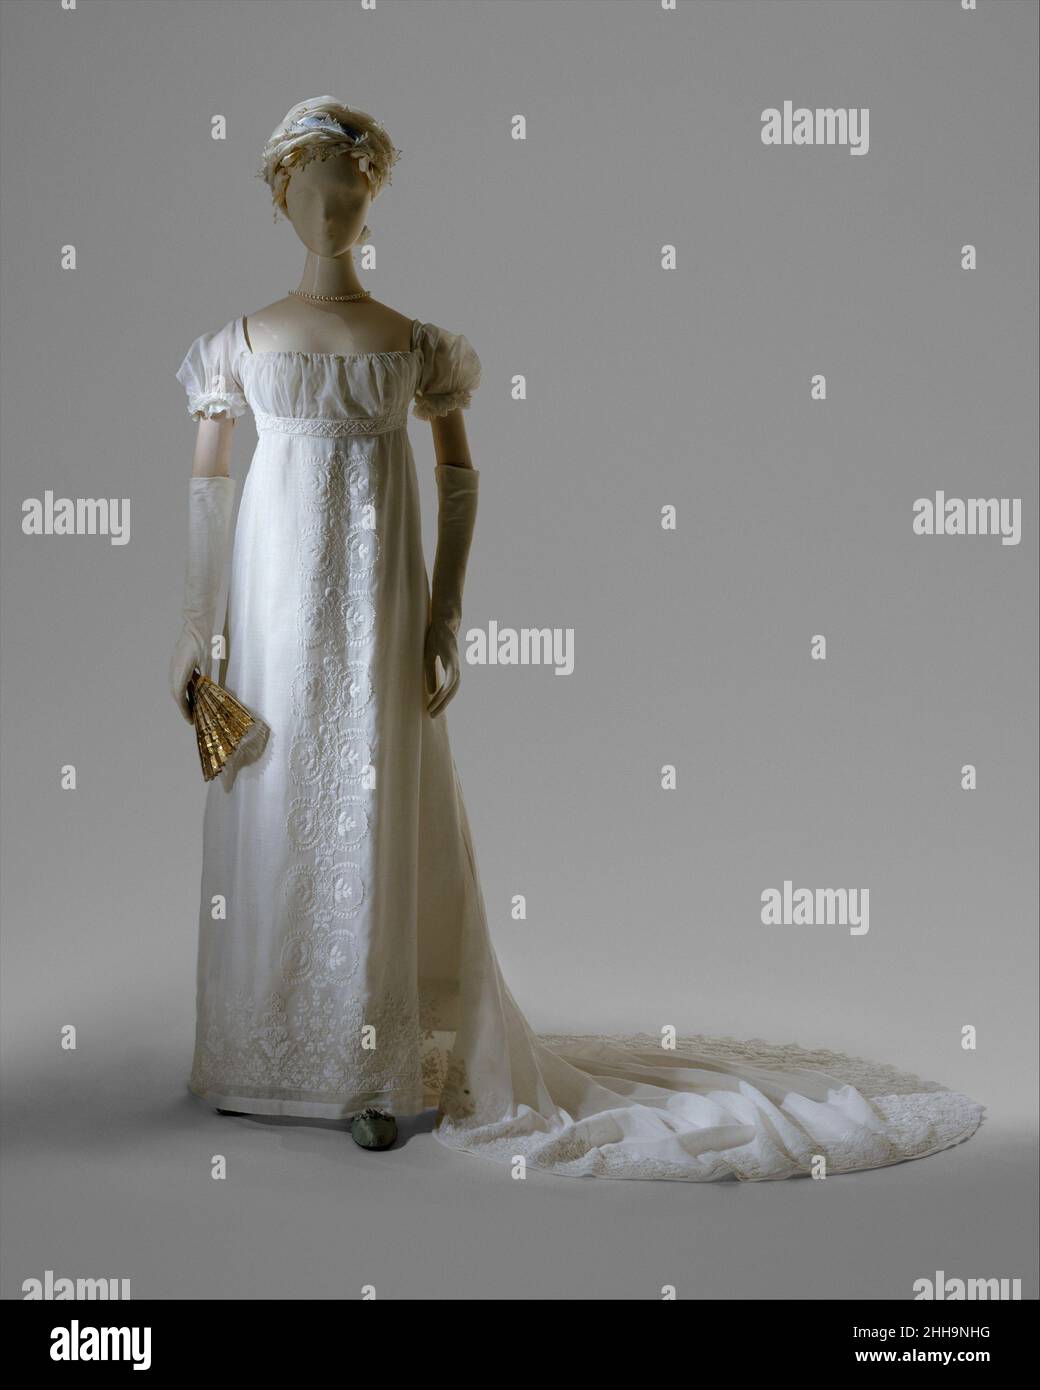 Evening dress 1804–5 French On December 24, 1803, Jerome Bonaparte (1784—1860), brother of Napoleon, wed Elizabeth Patterson (1785—1879) of Baltimore. The beautiful and fashionable young American was married in a dress of muslin and lace that, according to a contemporary, "would fit easily into a gentleman's pocket." This description evokes the sheer, narrow dresses that caused a sensation at the beginning of the nineteenth century, more because of their contrast with the elaborate hooped costumes of previous decades than for any real immodesty. Although originally thought to have been Patters Stock Photo